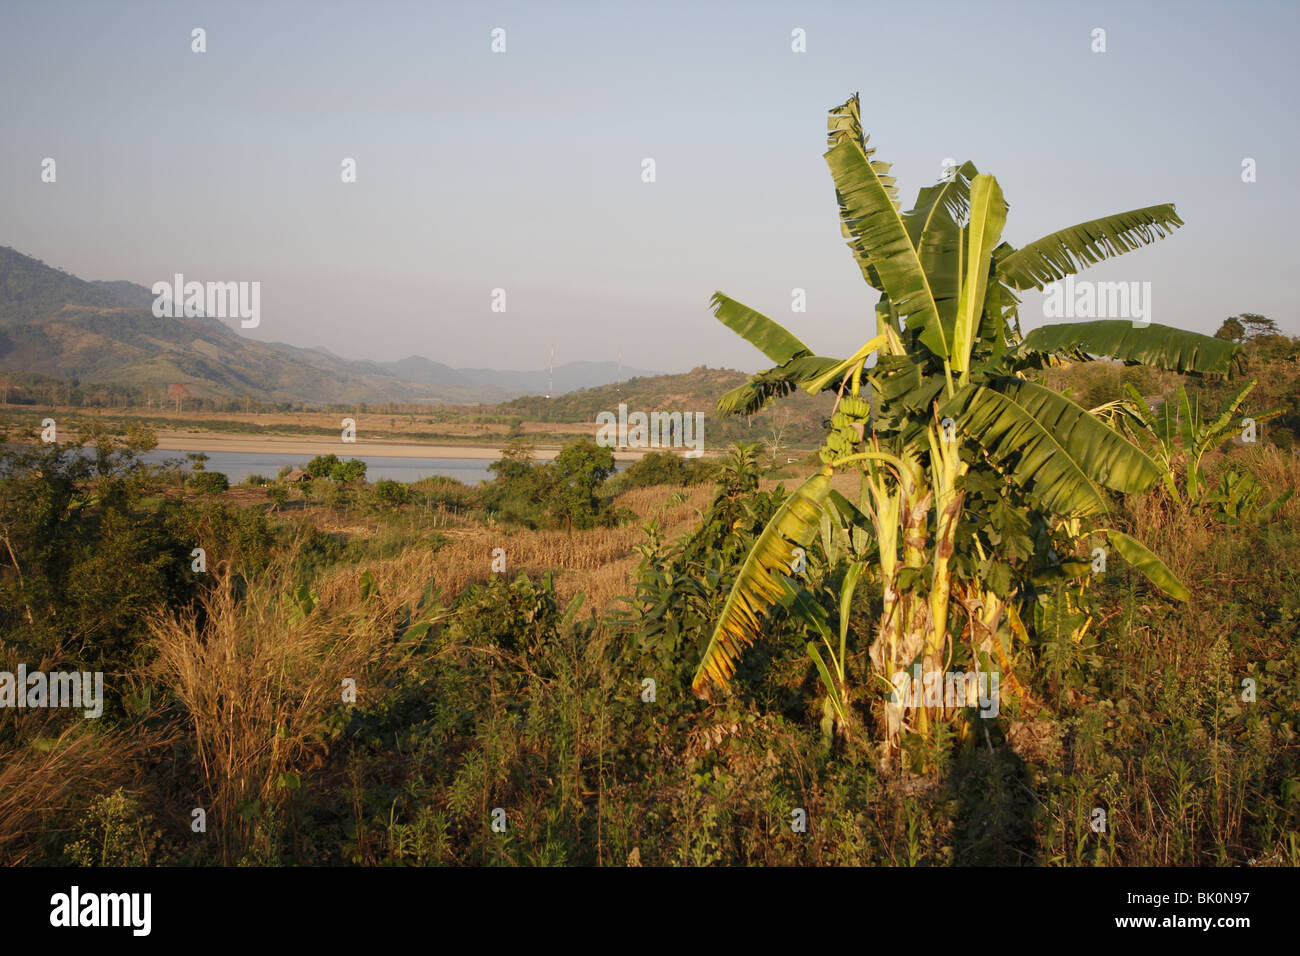 The Mekong River in the Golden Triangle near Chiang Saen, Northern Thailand Stock Photo